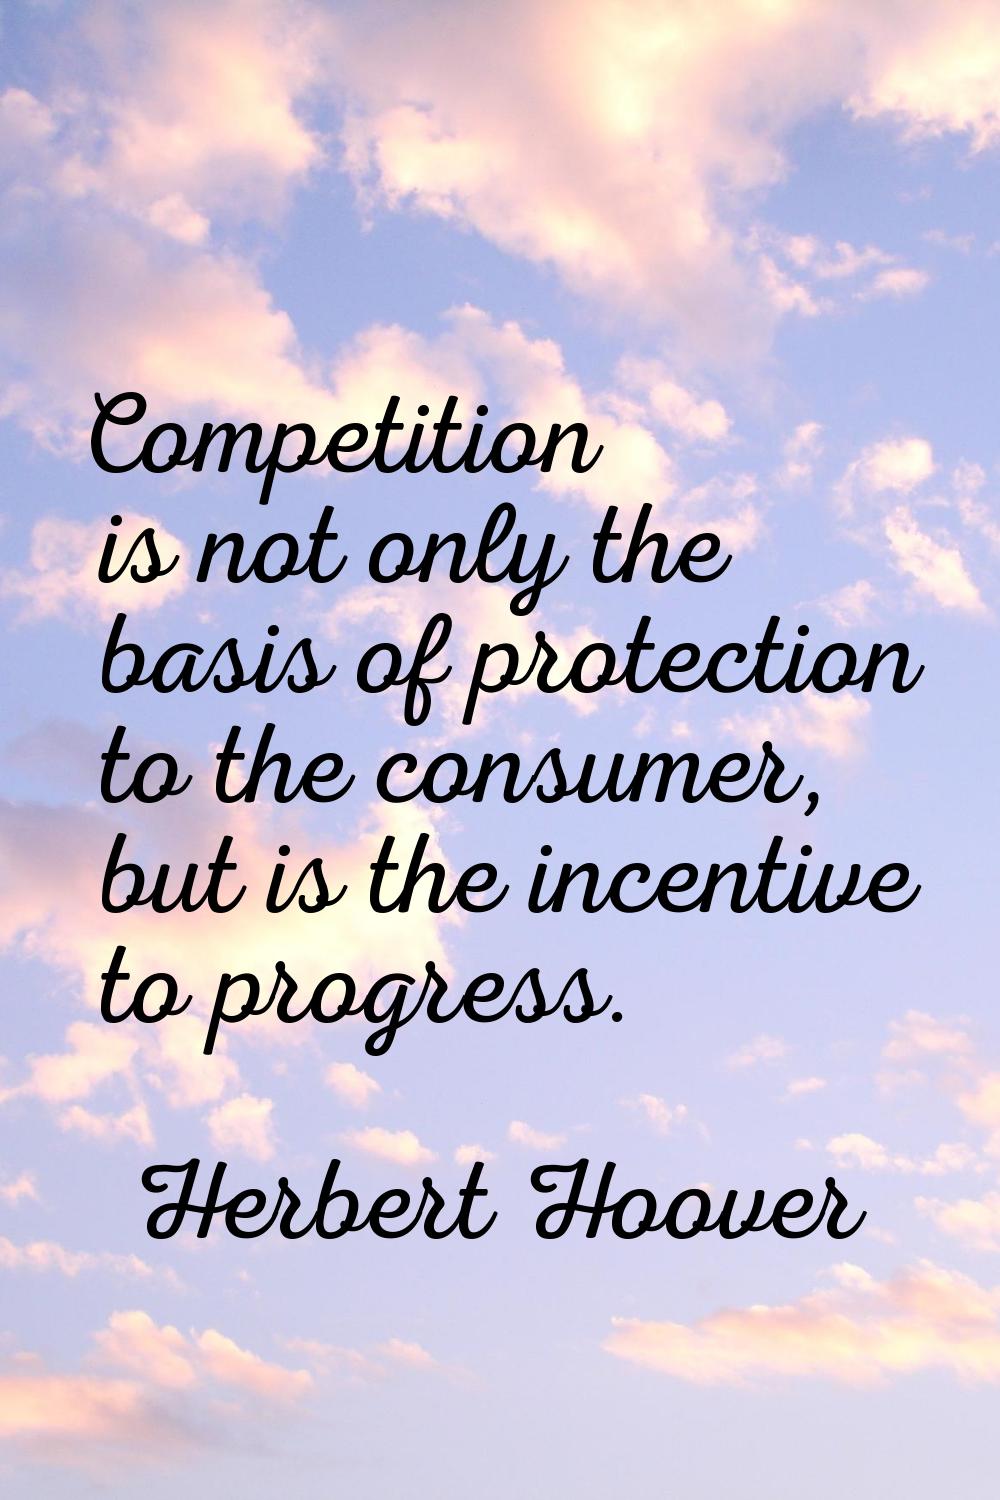 Competition is not only the basis of protection to the consumer, but is the incentive to progress.